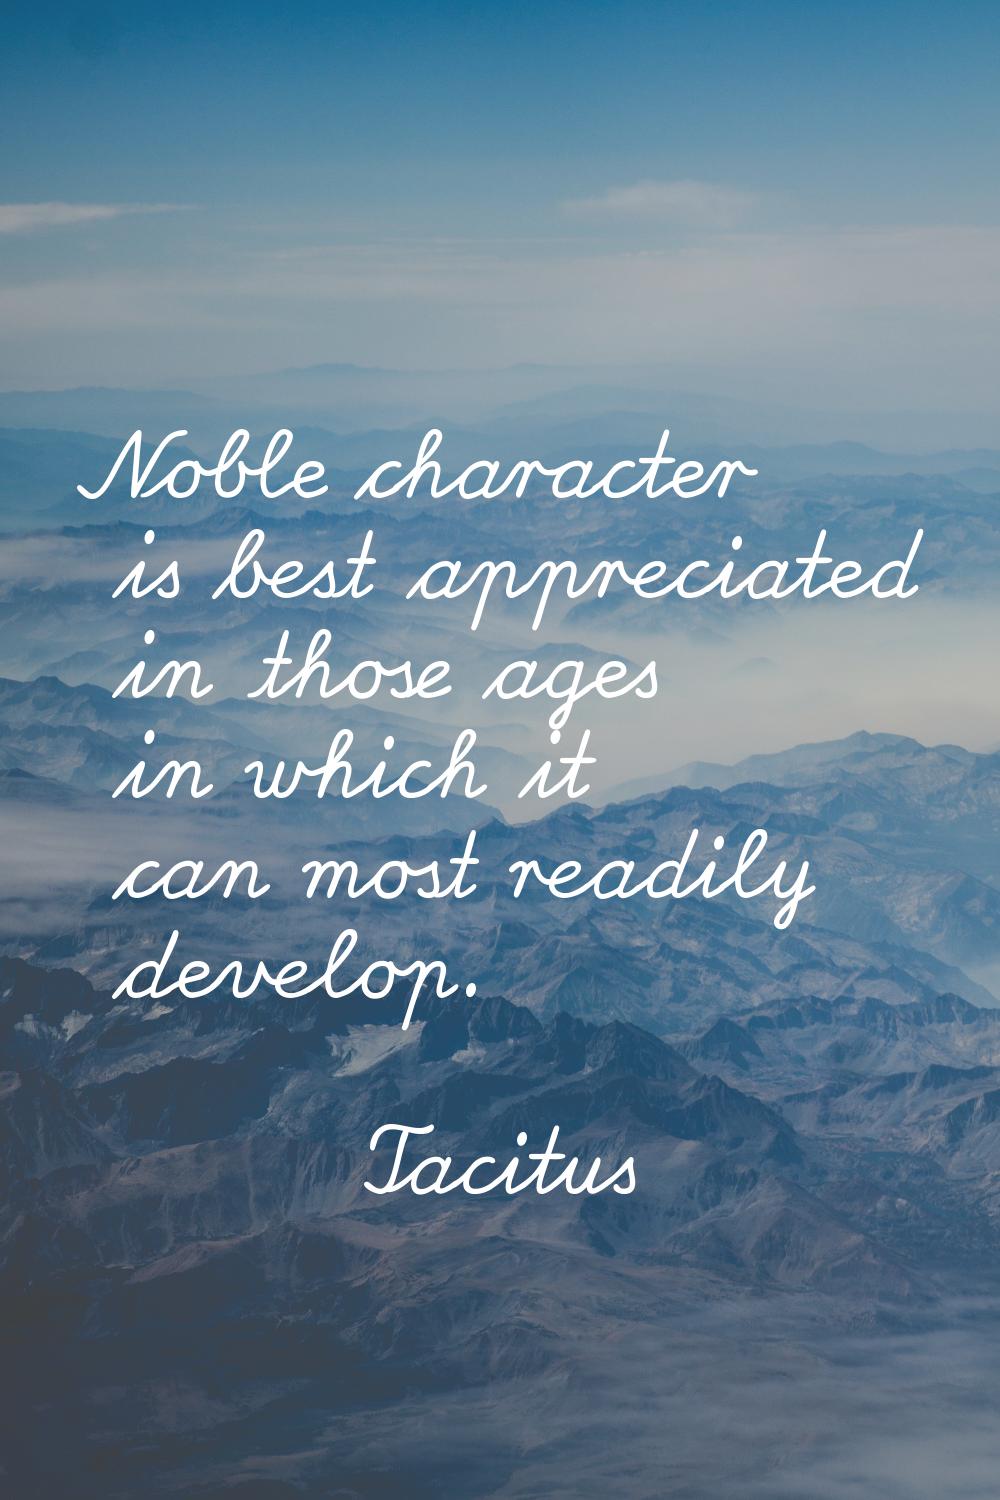 Noble character is best appreciated in those ages in which it can most readily develop.